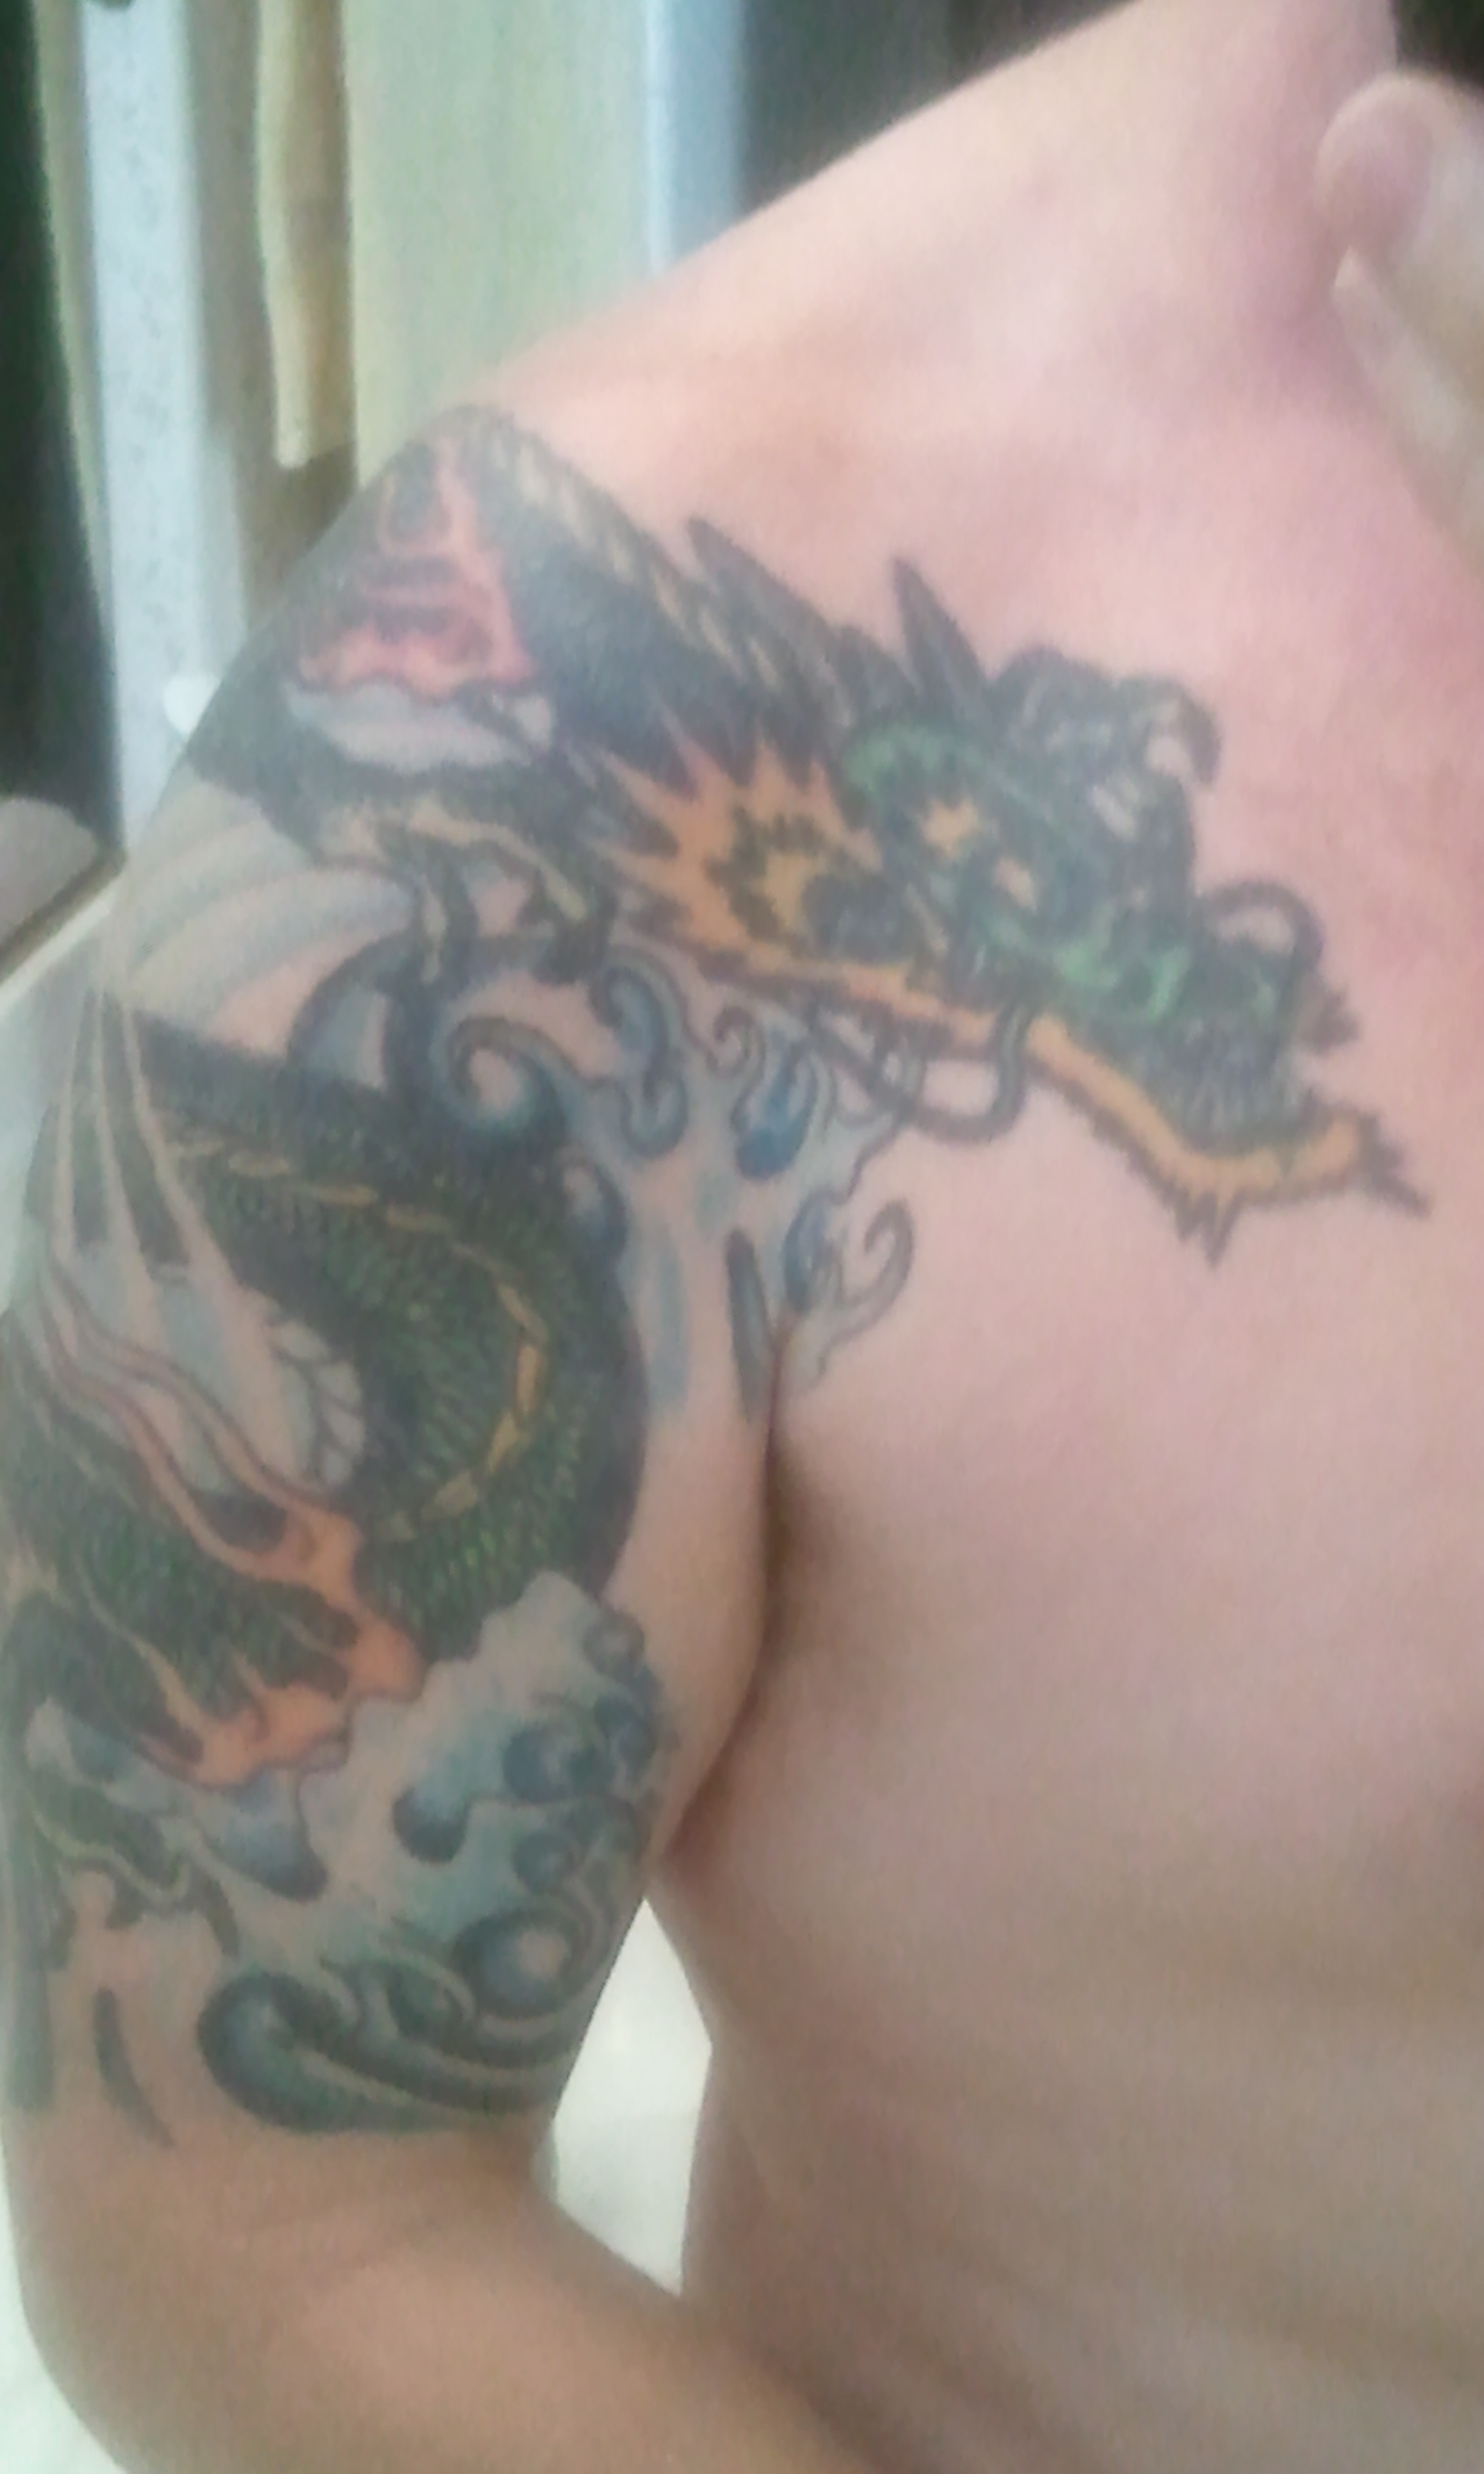 Dragon Tattoo on my left arm.This is a mirror image.